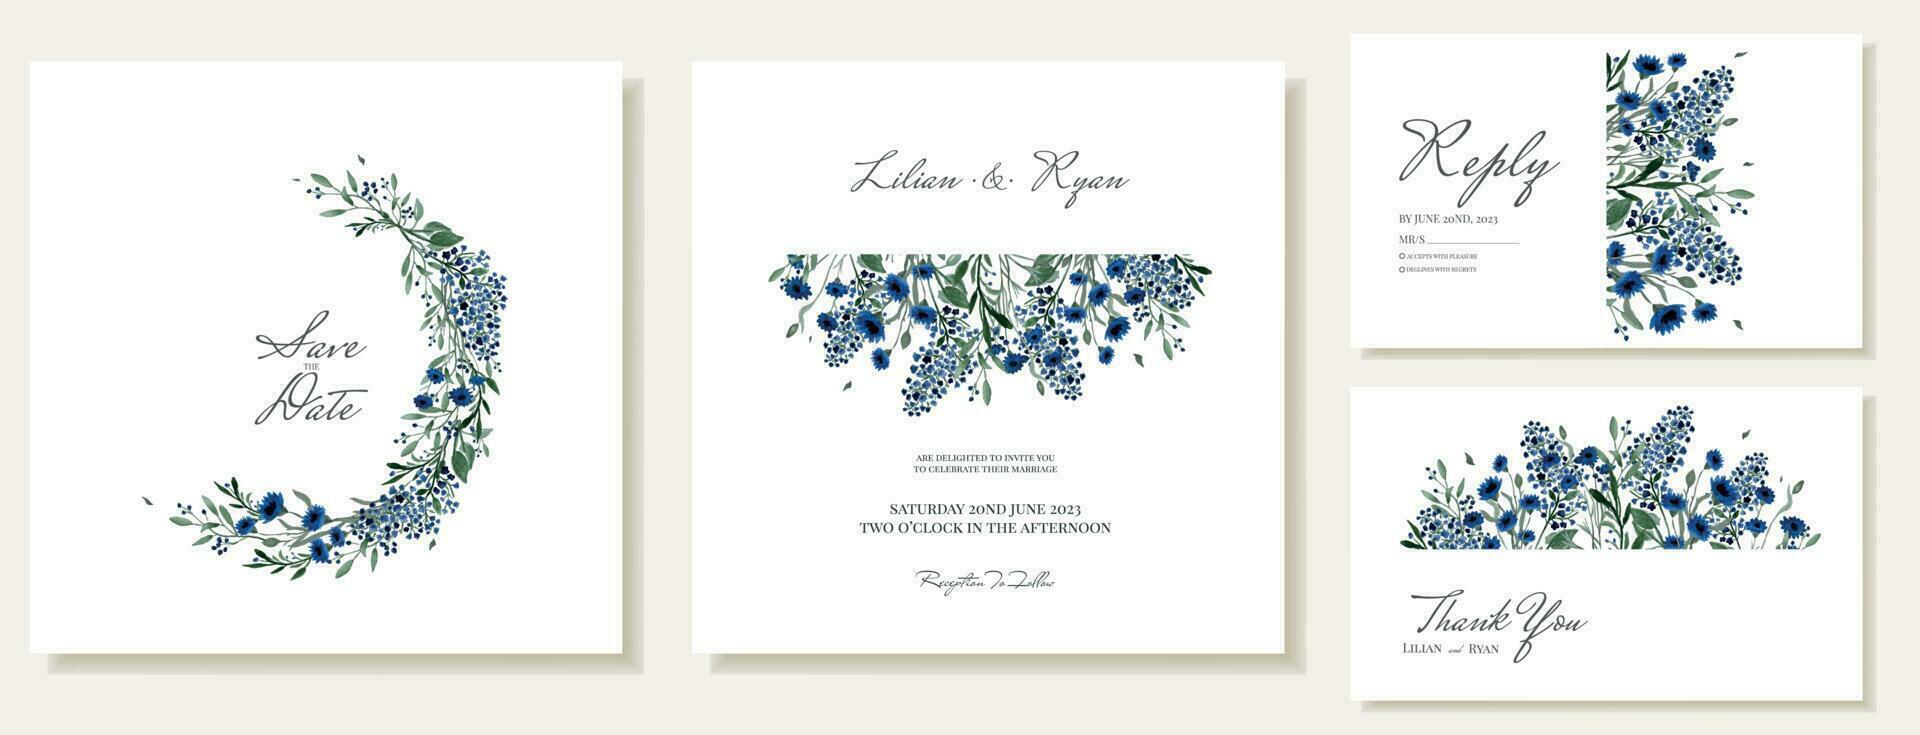 Square wedding invitations and thank you cards with hand-drawn watercolor summer wild blue flowers. Vector templates